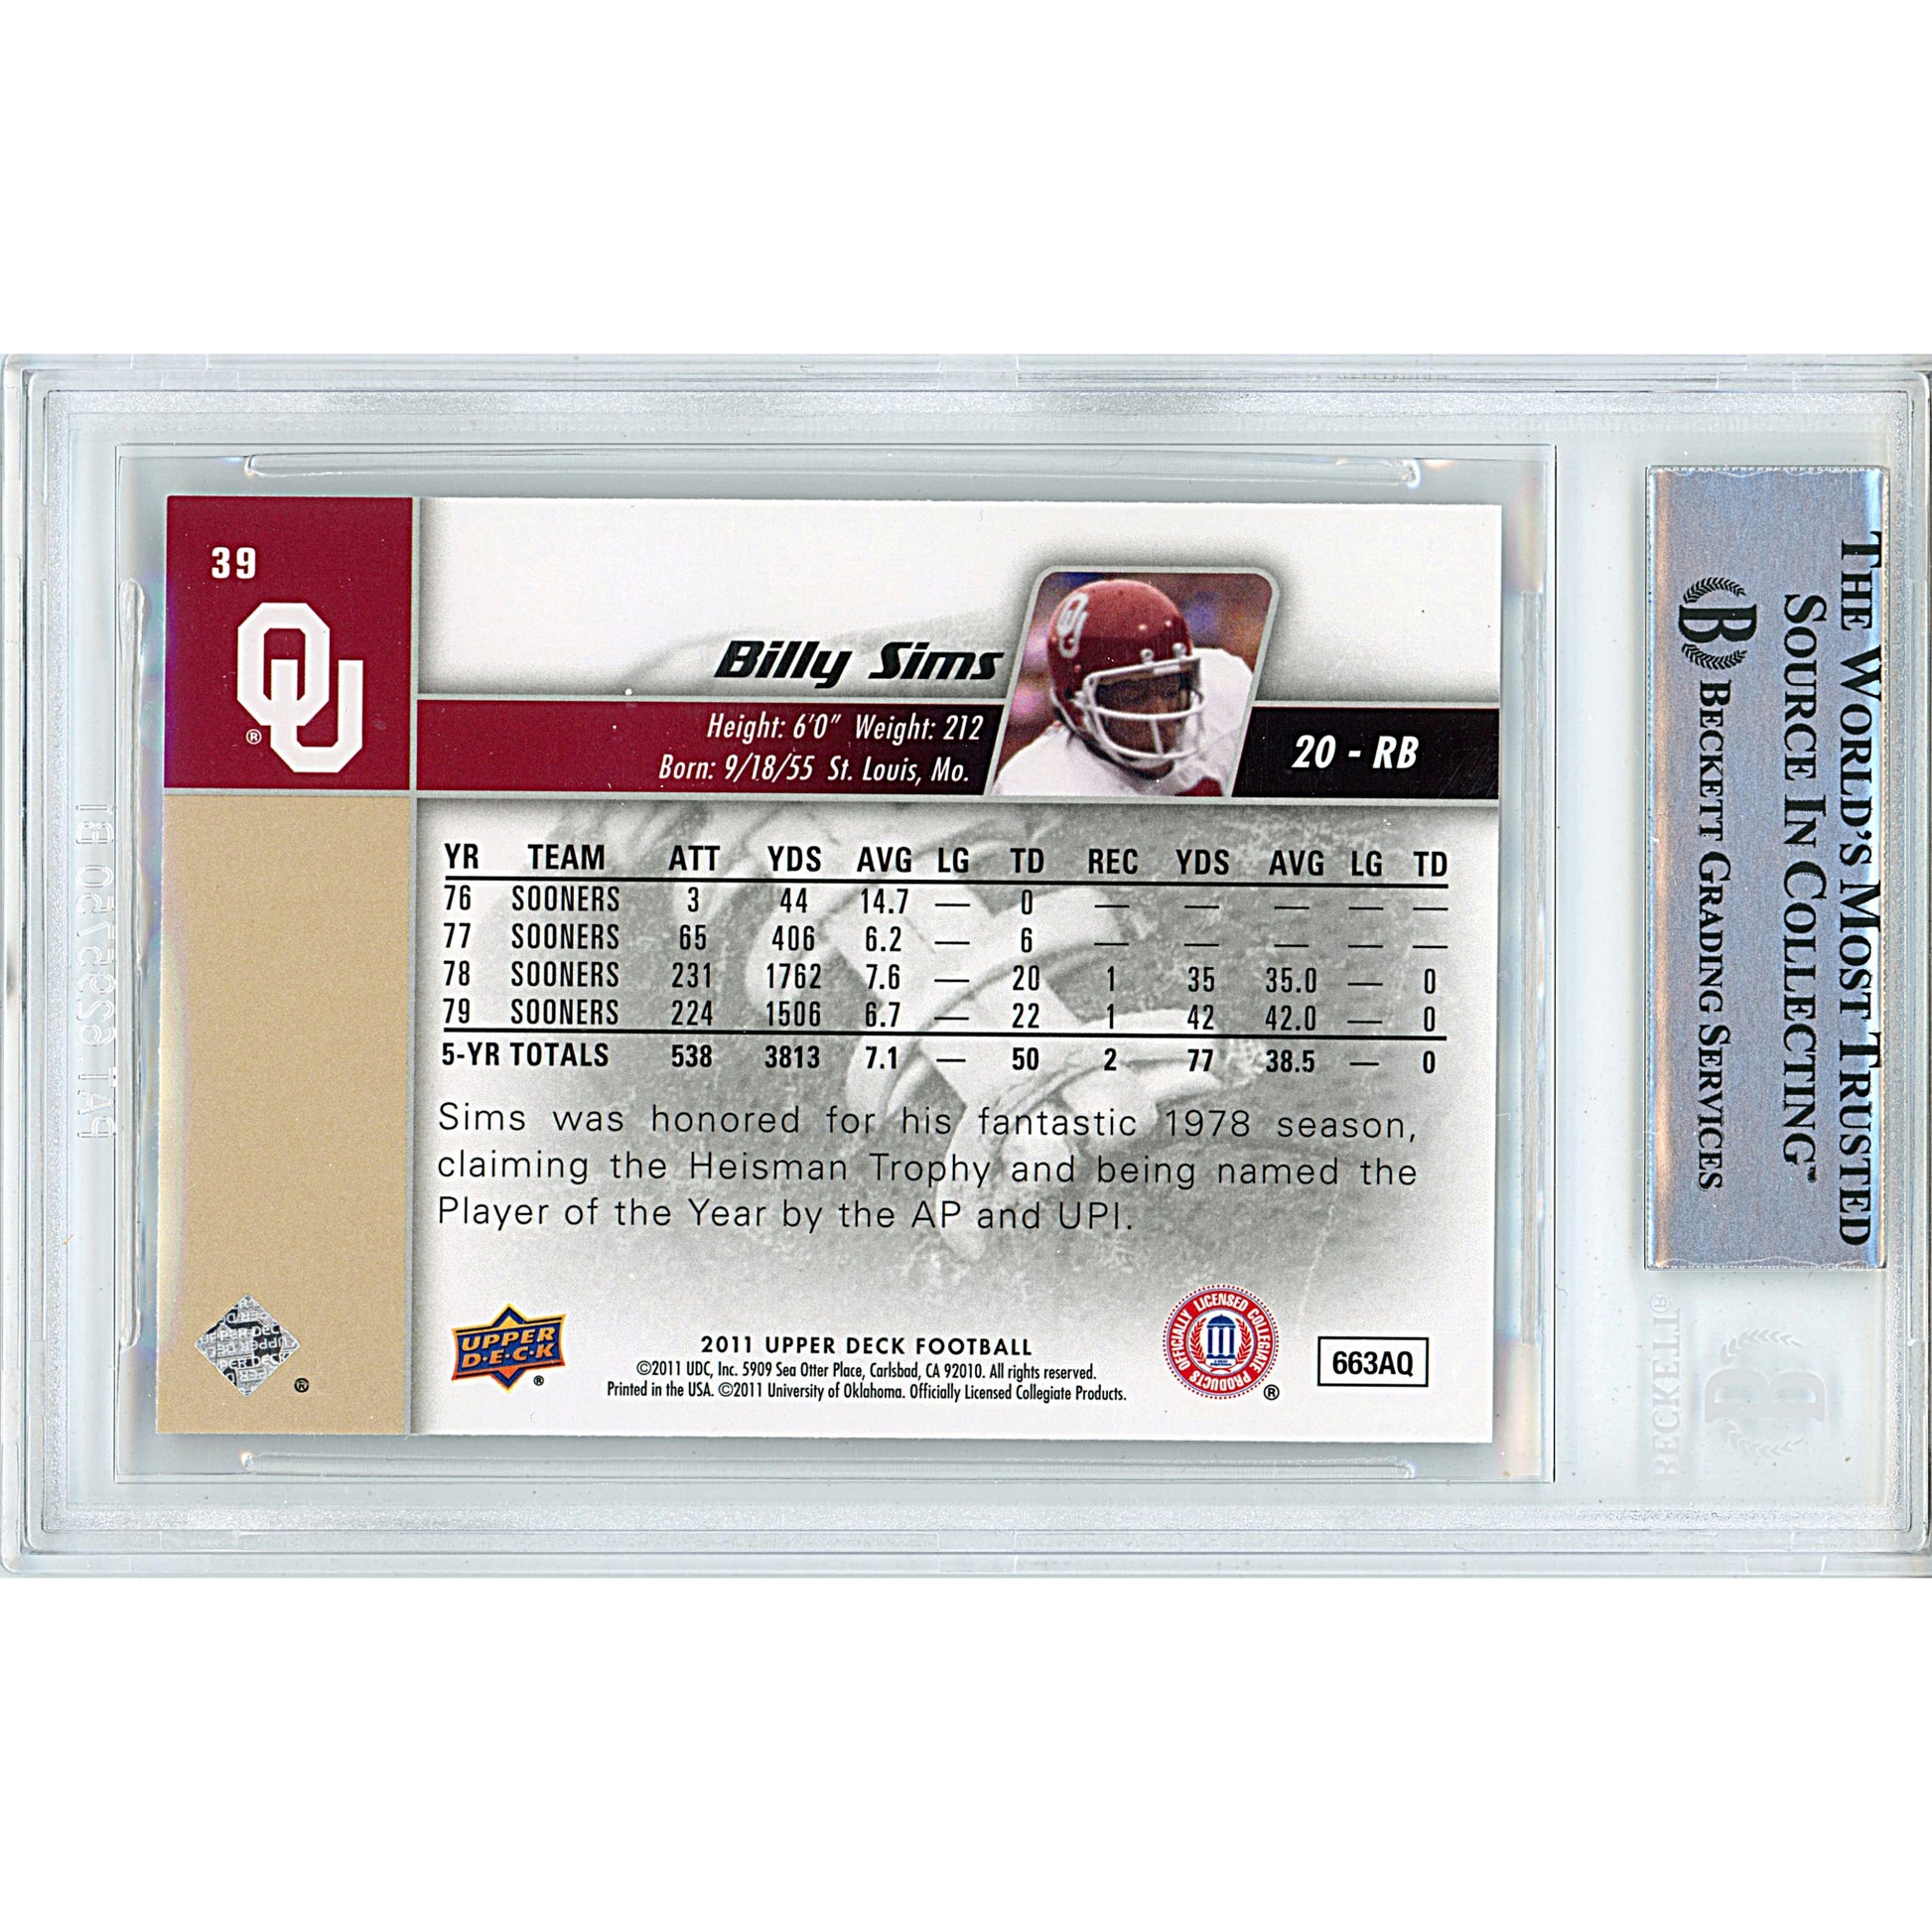 Football- Autographed- Billy Sims Signed 2011 Upper Deck Oklahoma Sooners Football Card Beckett Authentication Slabbed 00014998103 - 102